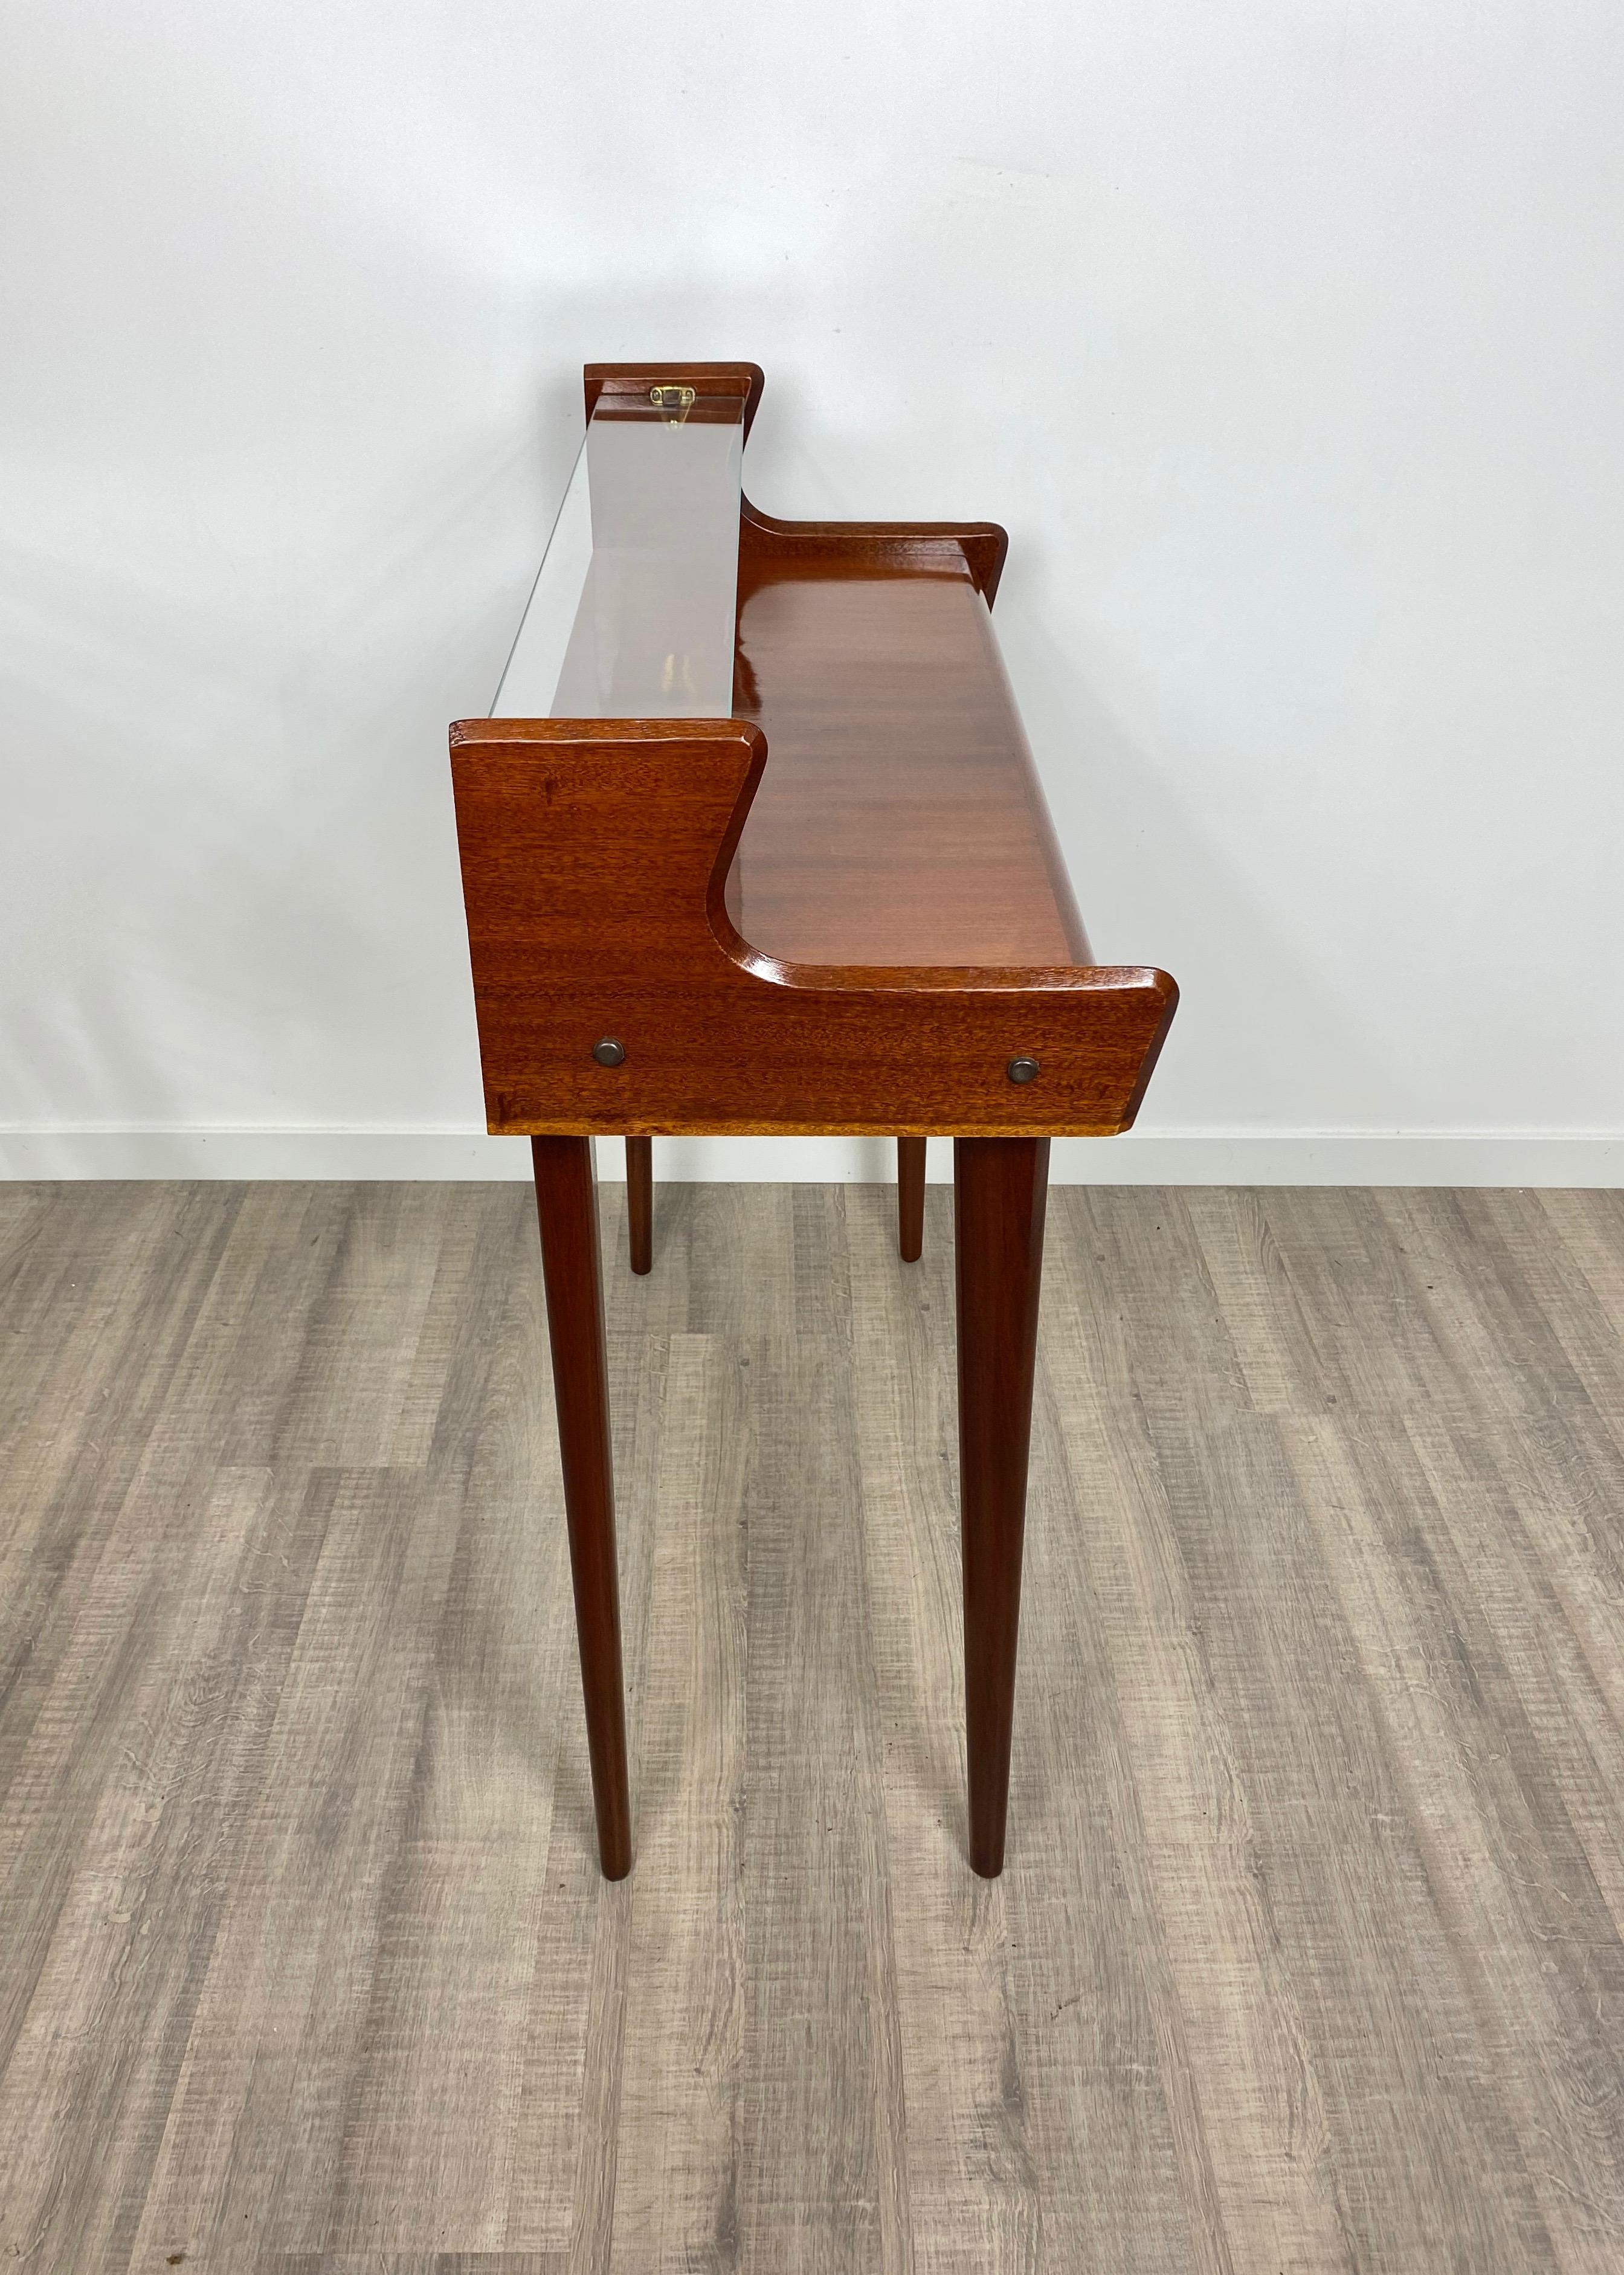 Italian Midcentury Mahogany Wood and Glass Console Table by Carlo de Carli 1950s For Sale 2